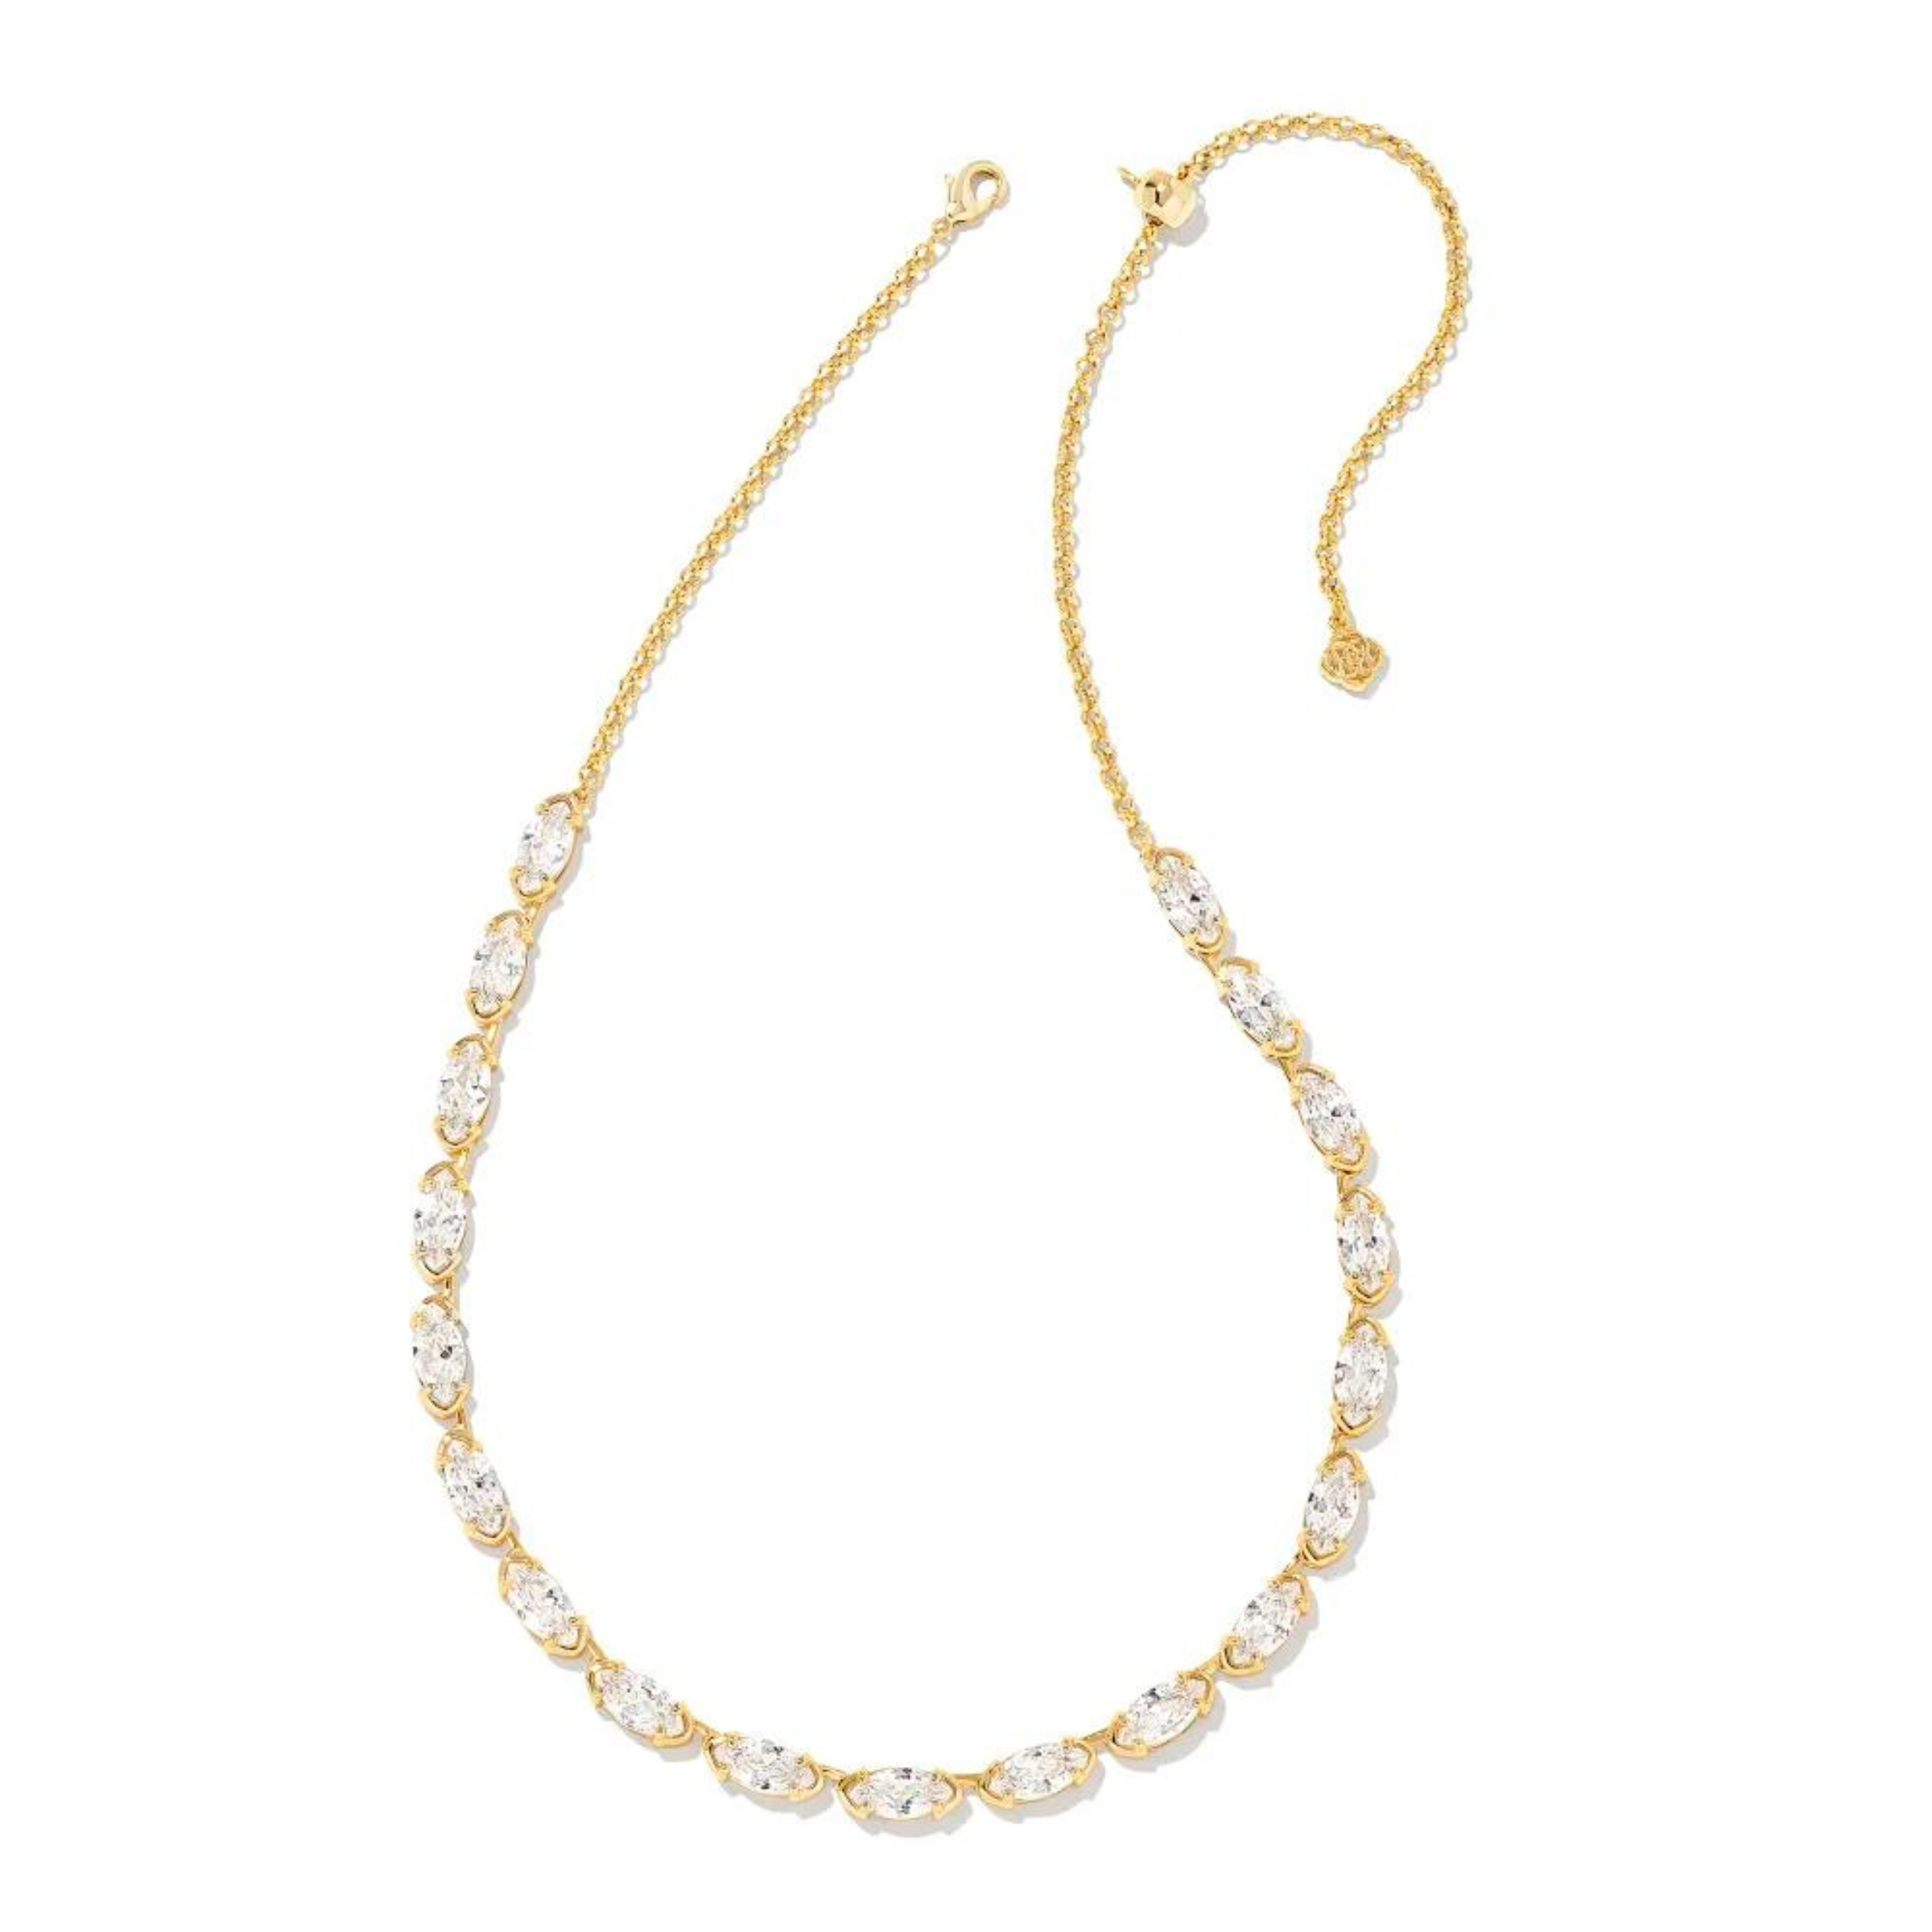 Gold tennis necklace with clear crystals. This necklace is pictured on a white background. 